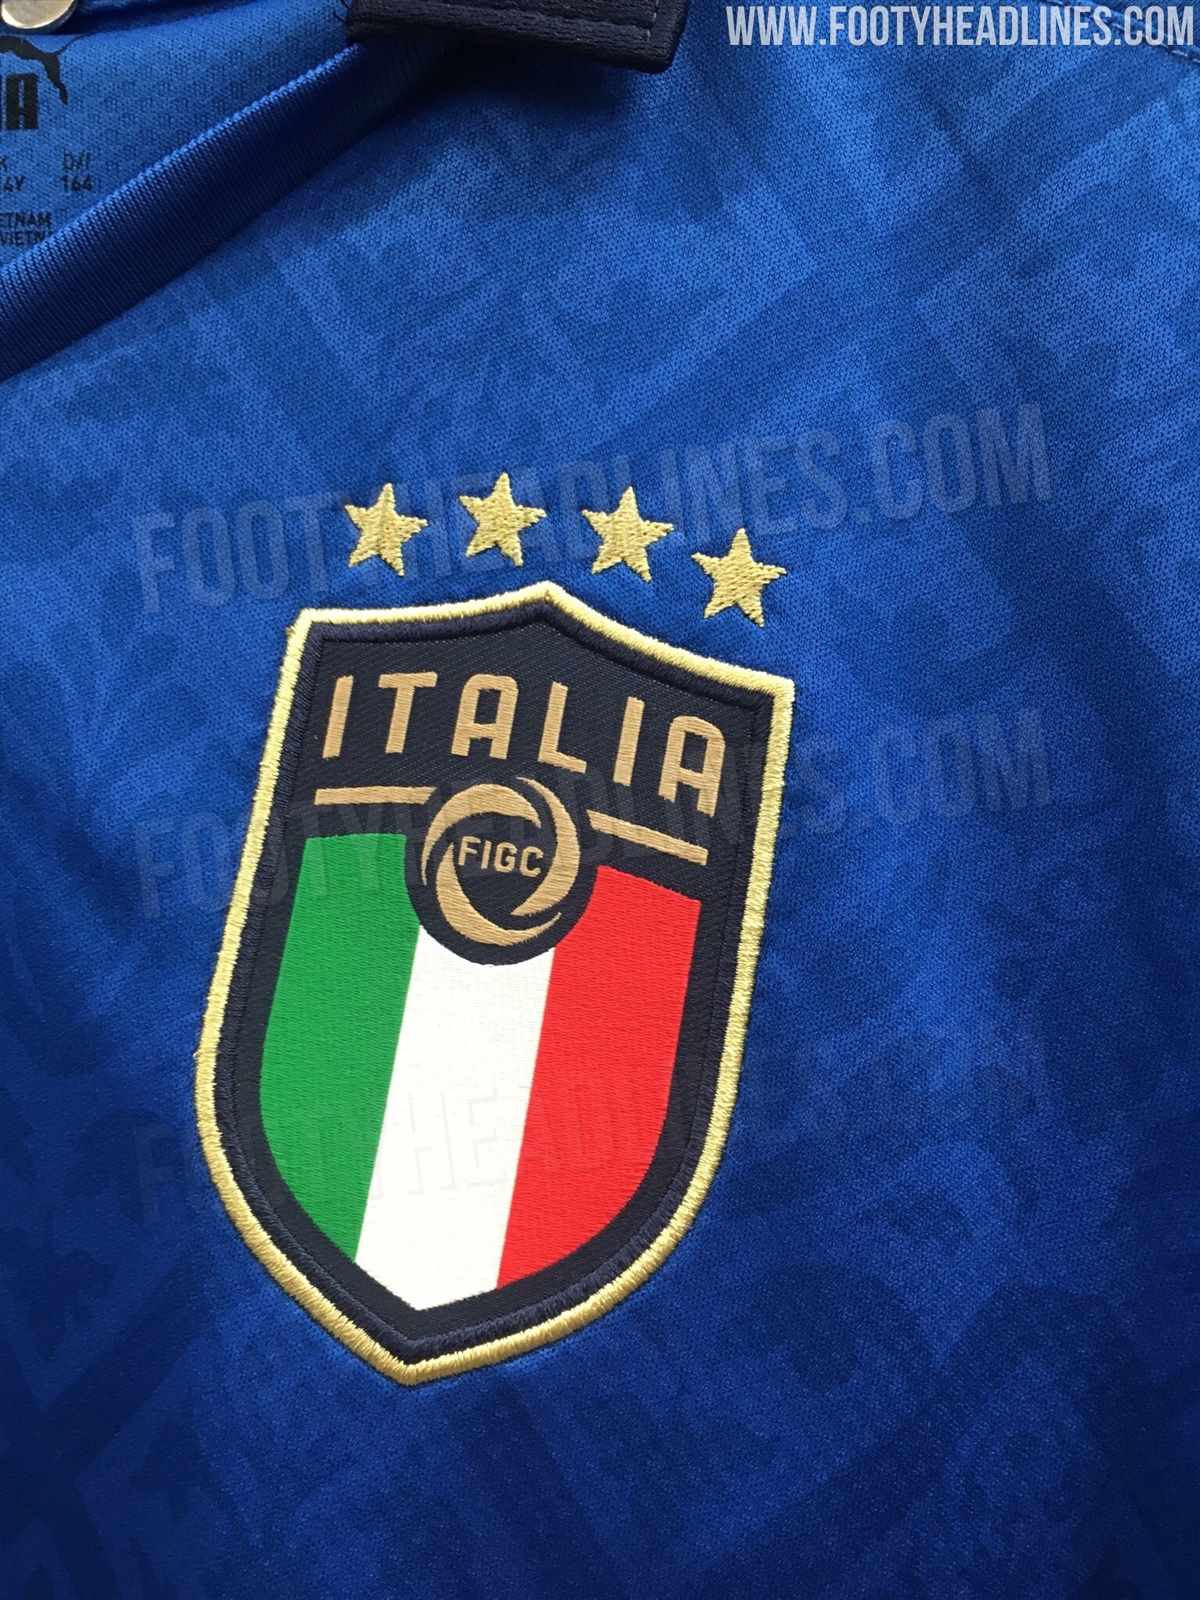 Italy EURO 2020 Home Kit Leaked - Official Pictures - Footy Headlines